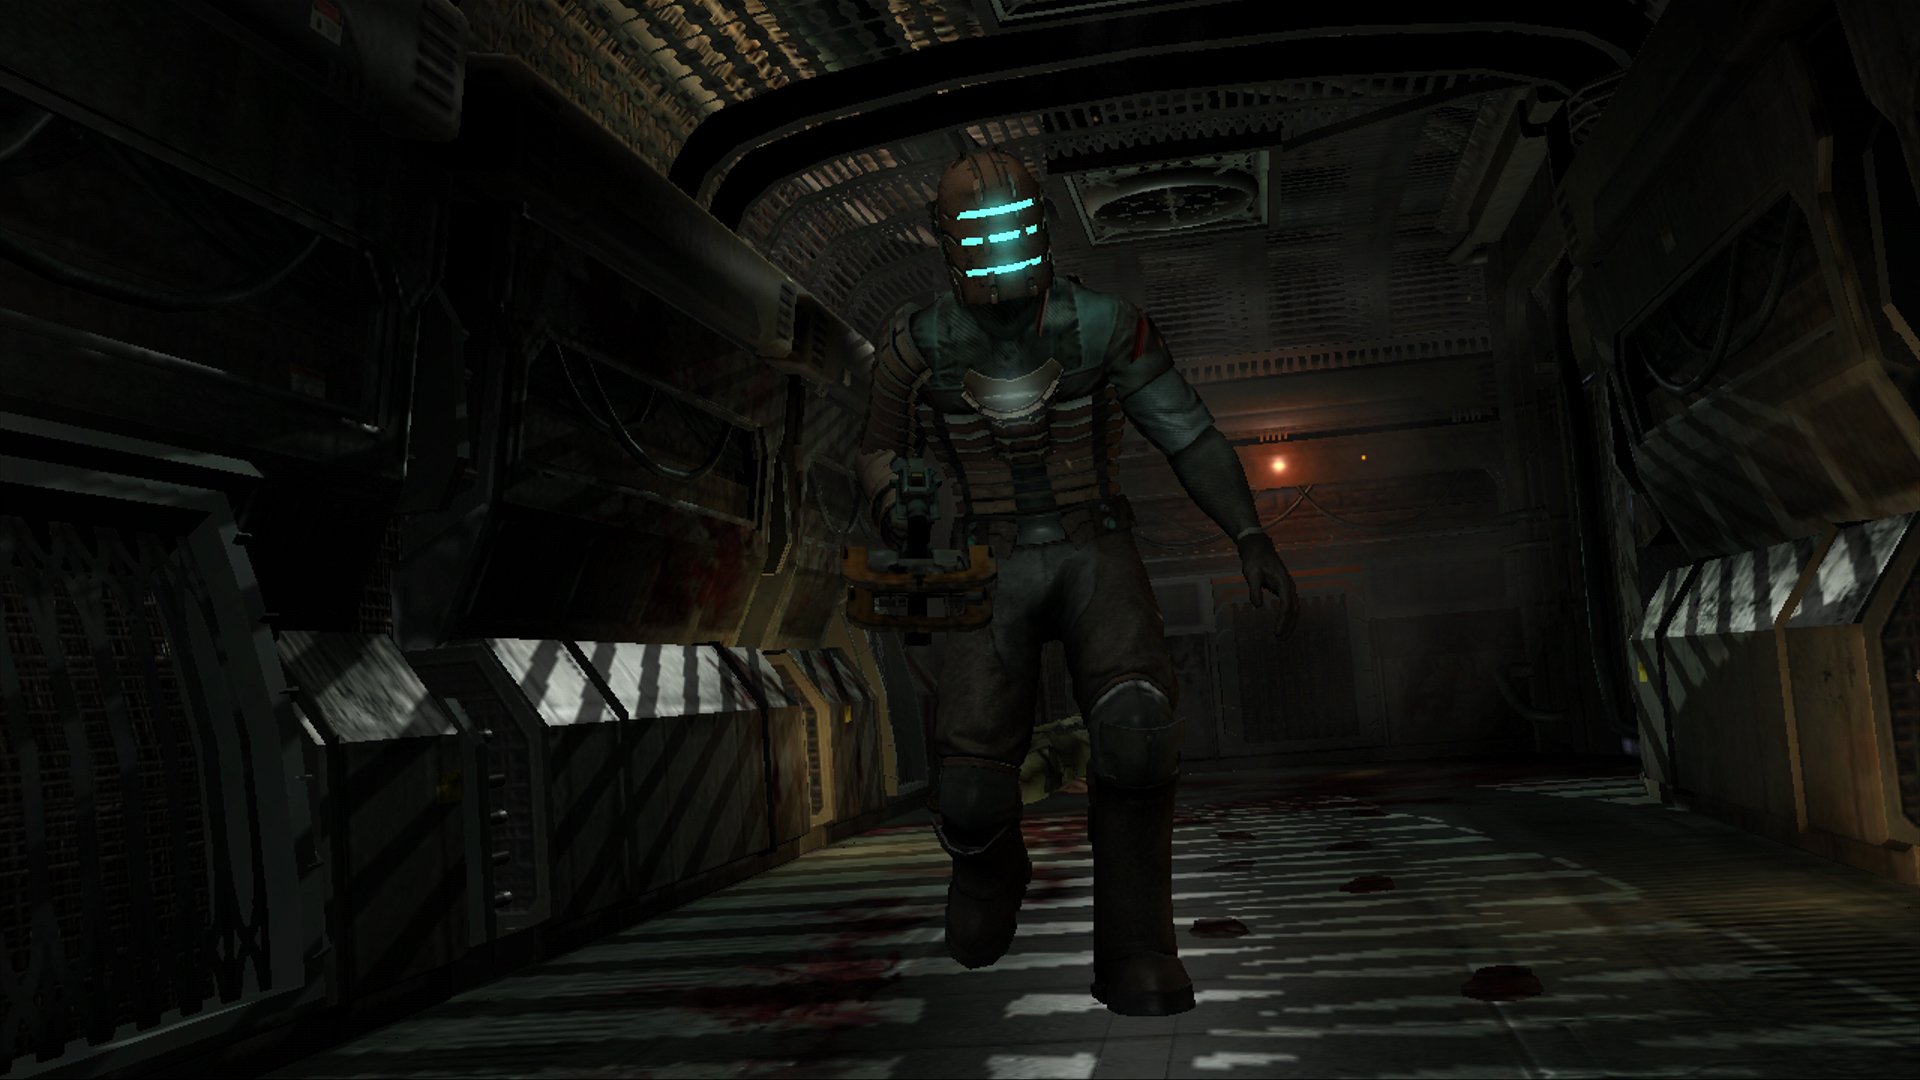 Media asset in full size related to 3dfxzone.it news item entitled as follows: Nuovi screenshots del game Dead Space (Unreal Engine 3.0) | Image Name: news7825_6.jpg